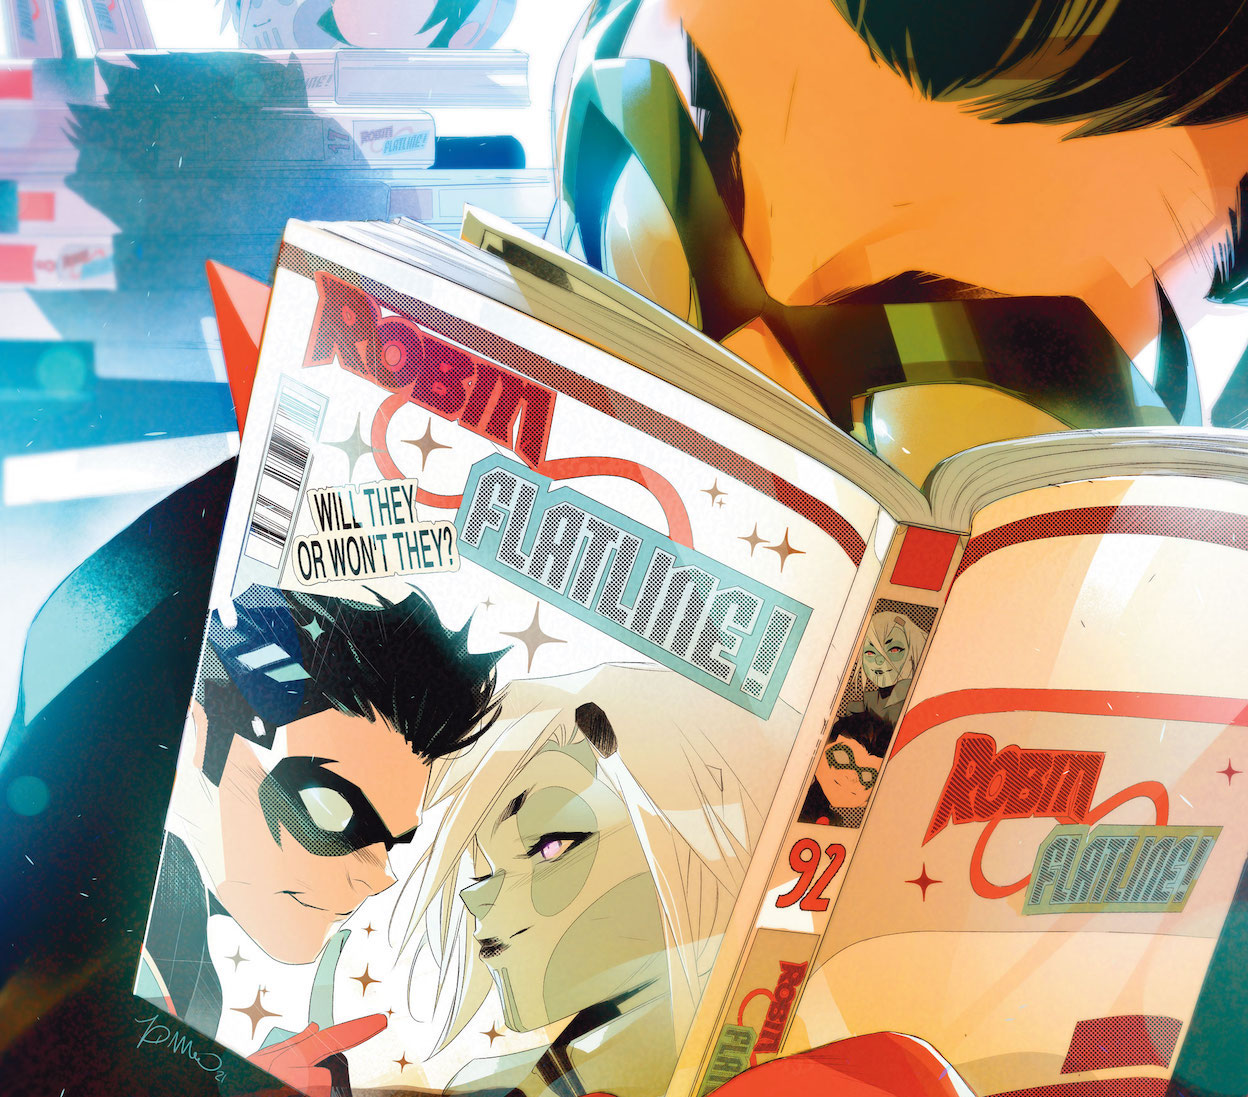 'Robin' #7 offers multiple points of entertainment